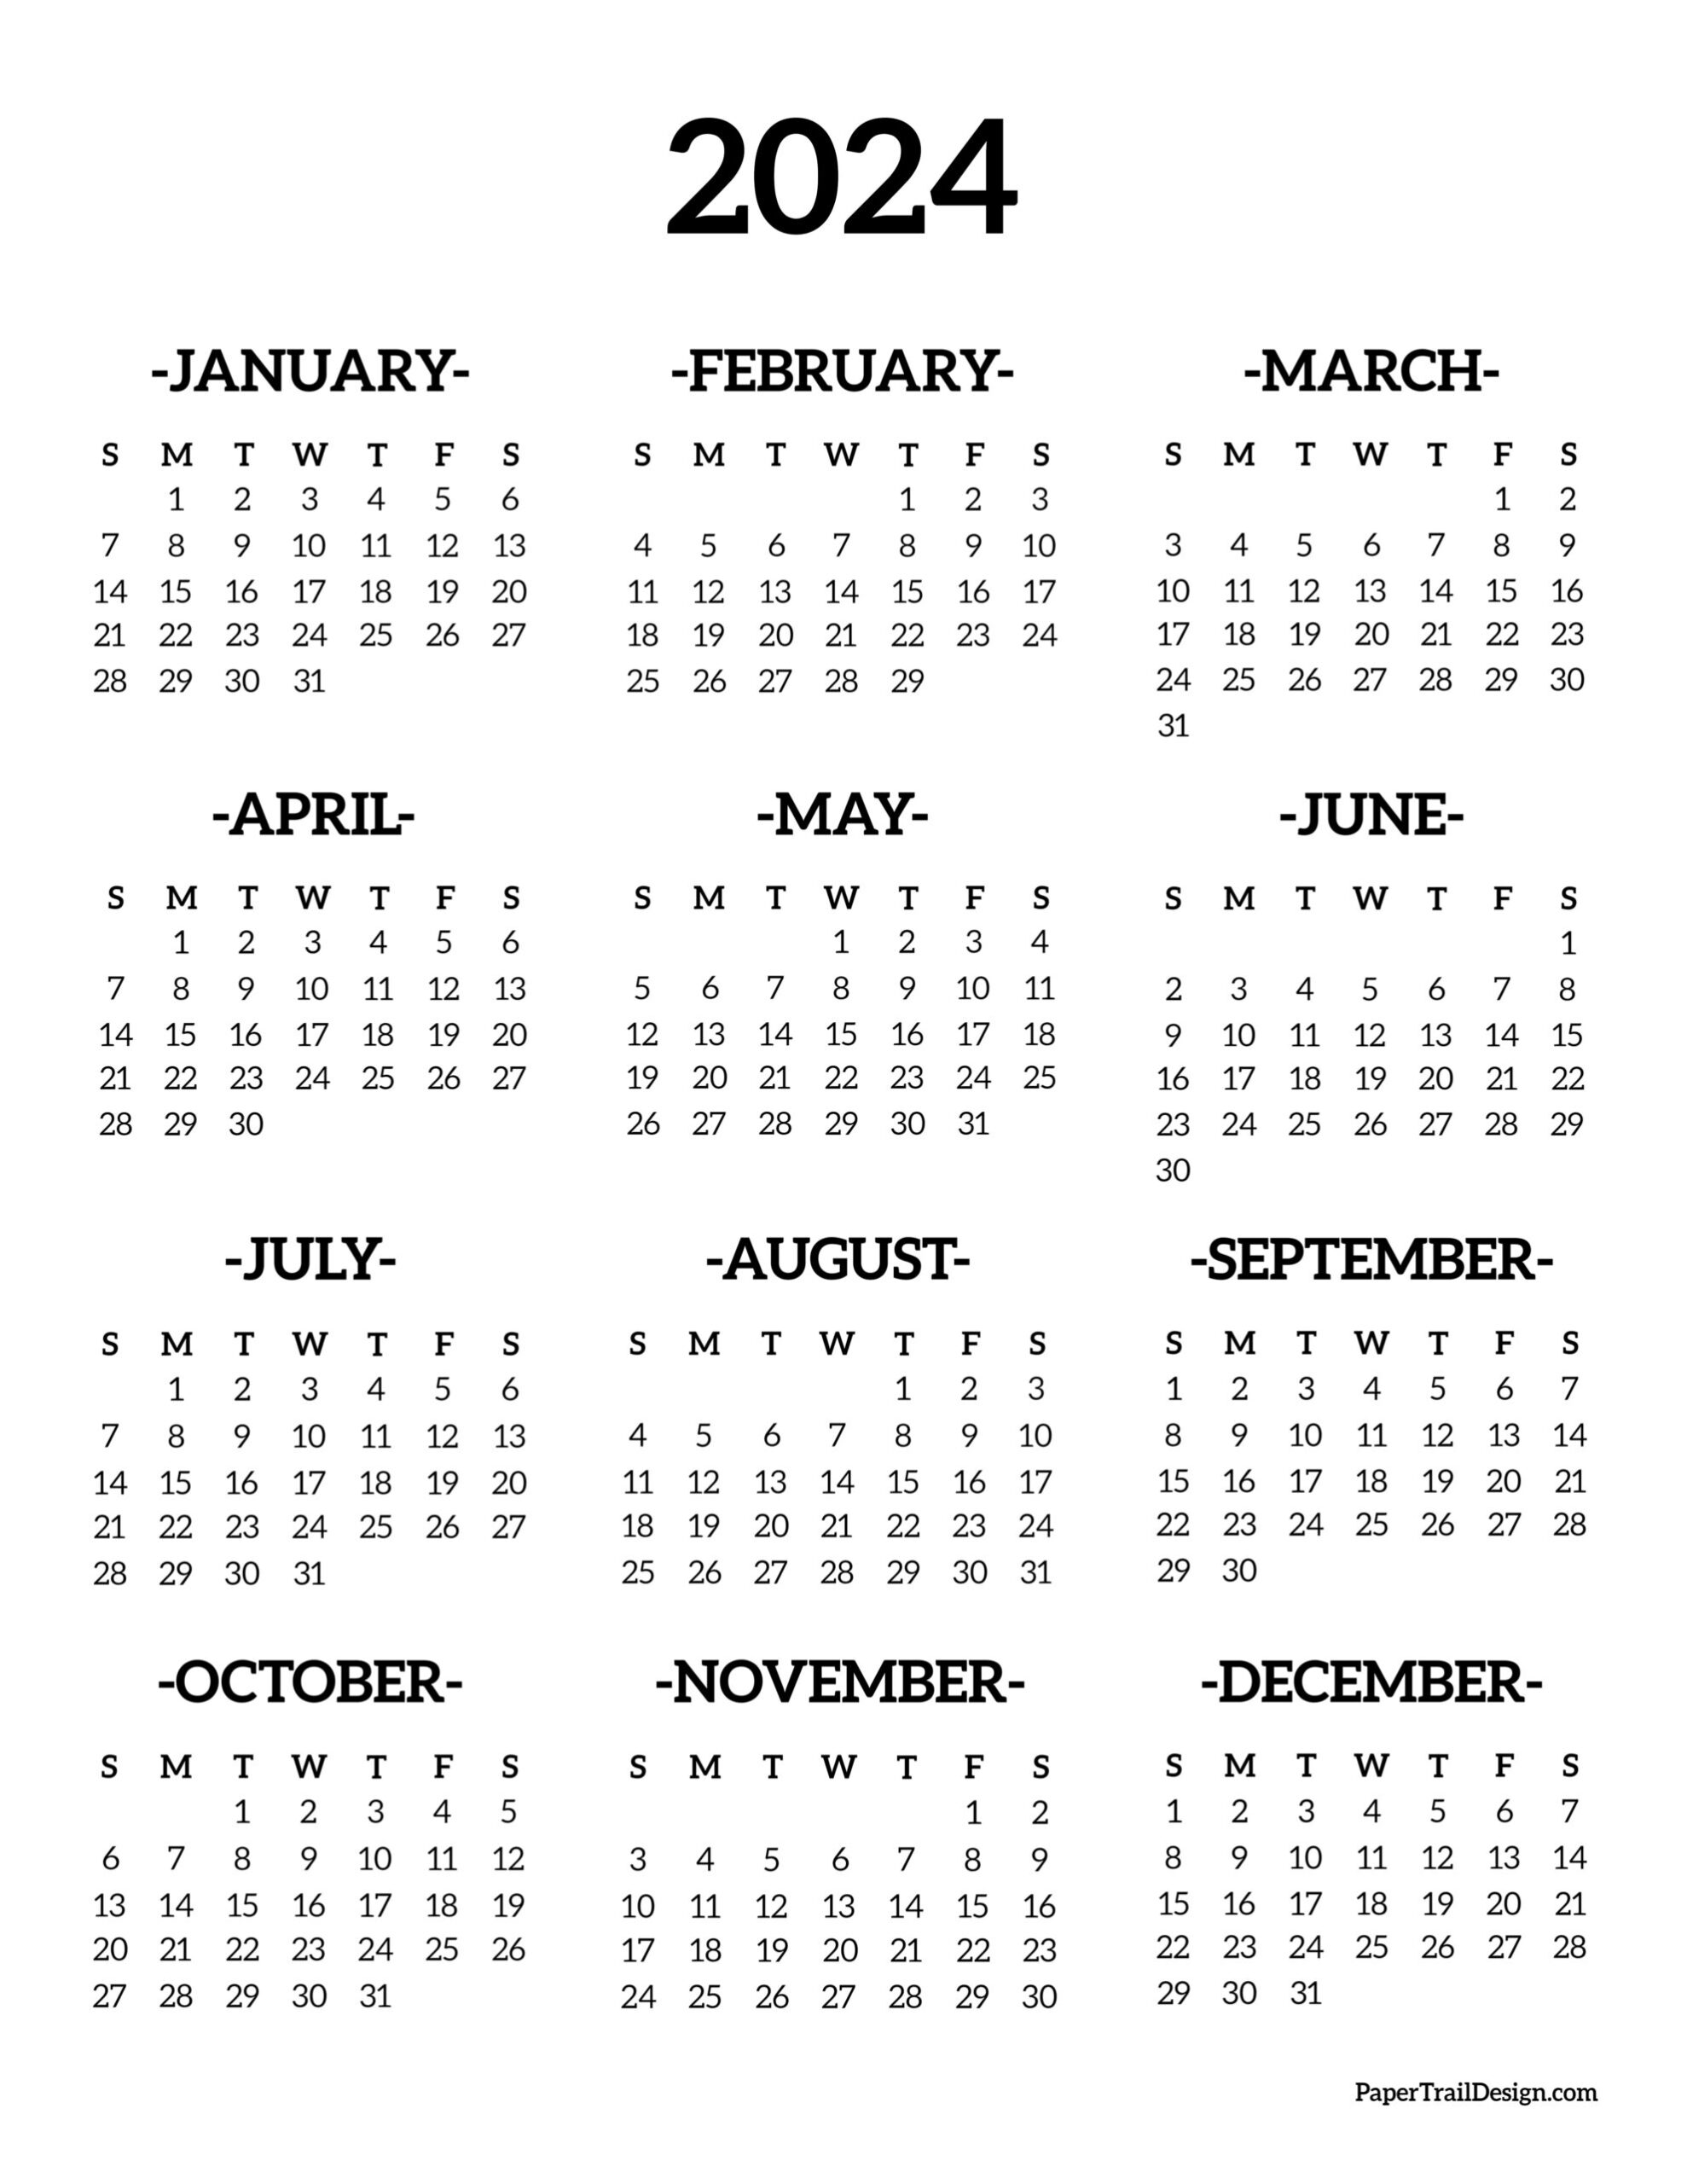 Calendar 2024 Printable One Page - Paper Trail Design for Full Page 2024 Printable Calendar